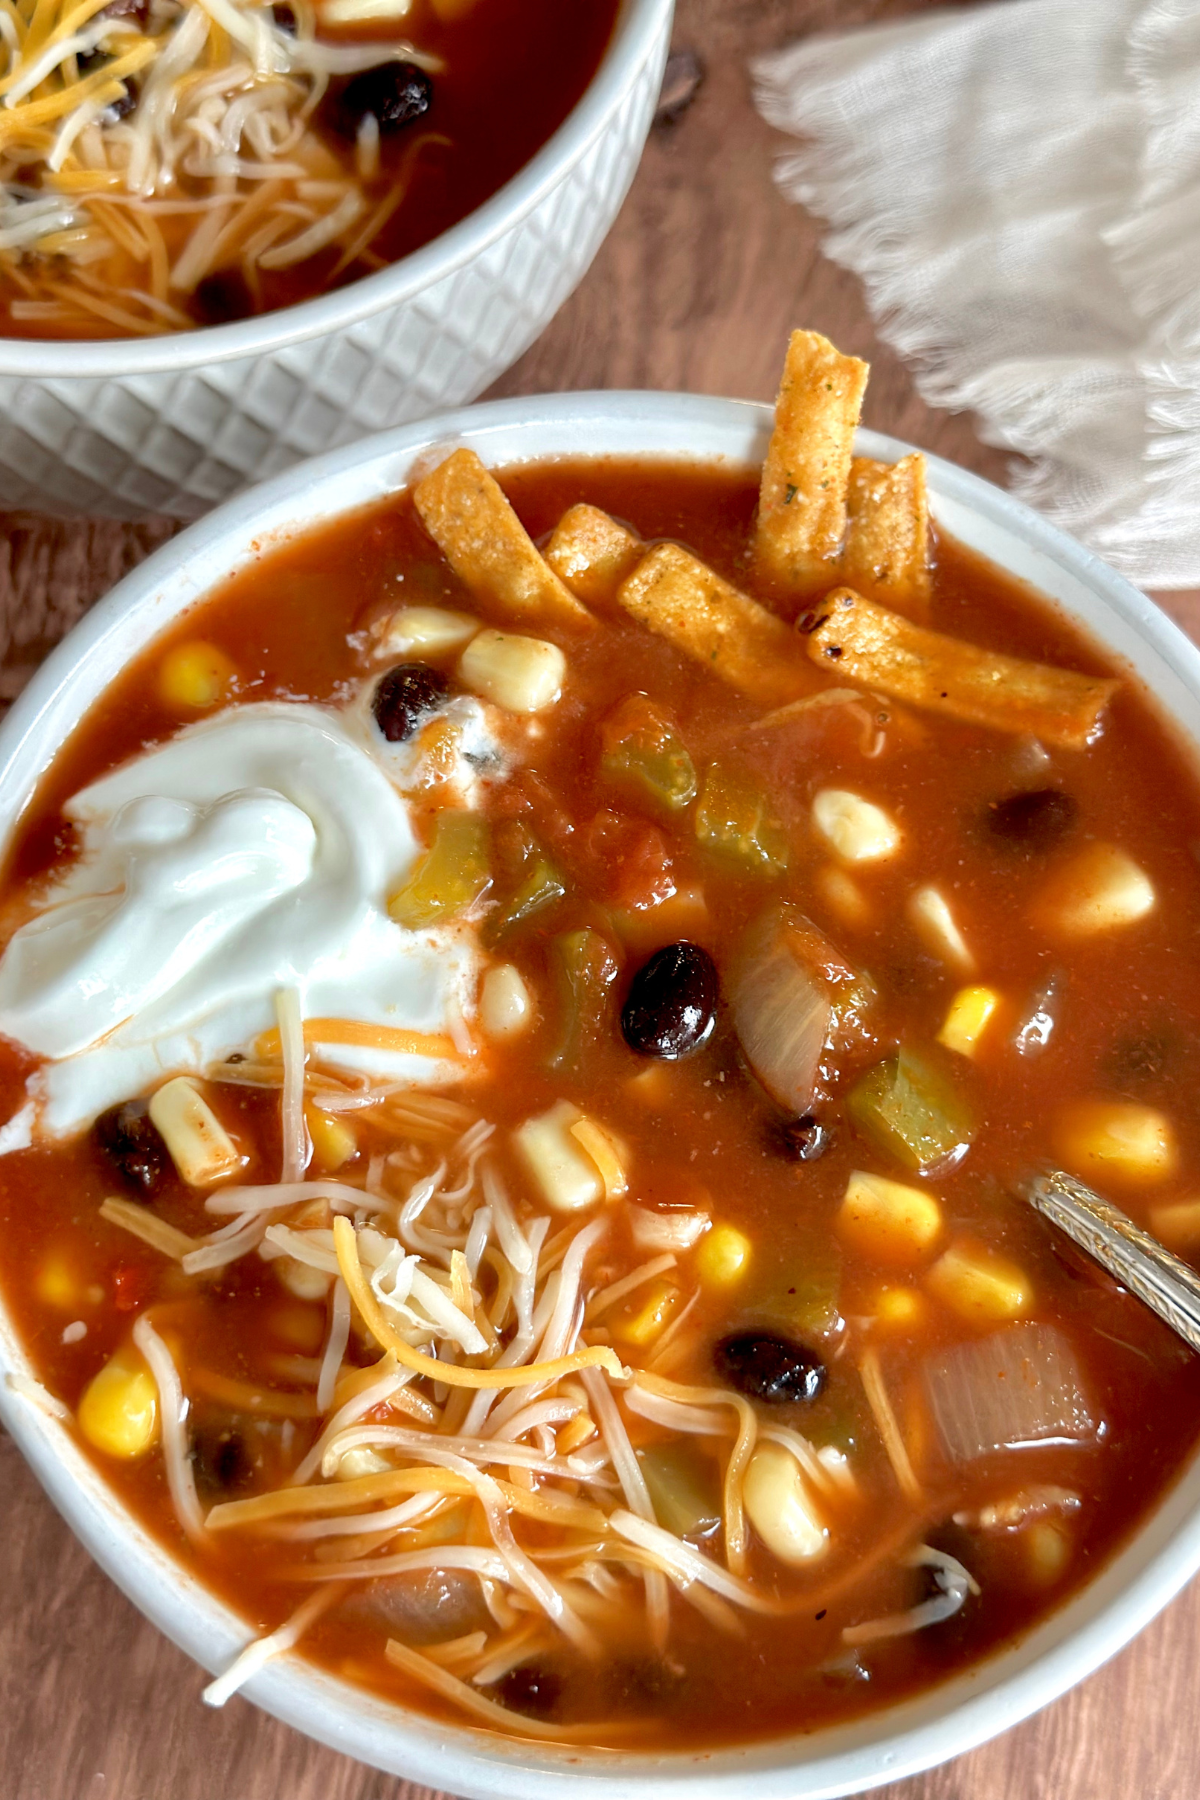 A bowl of Southwestern soup garnished with sour cream, cheese, and tortilla chips.